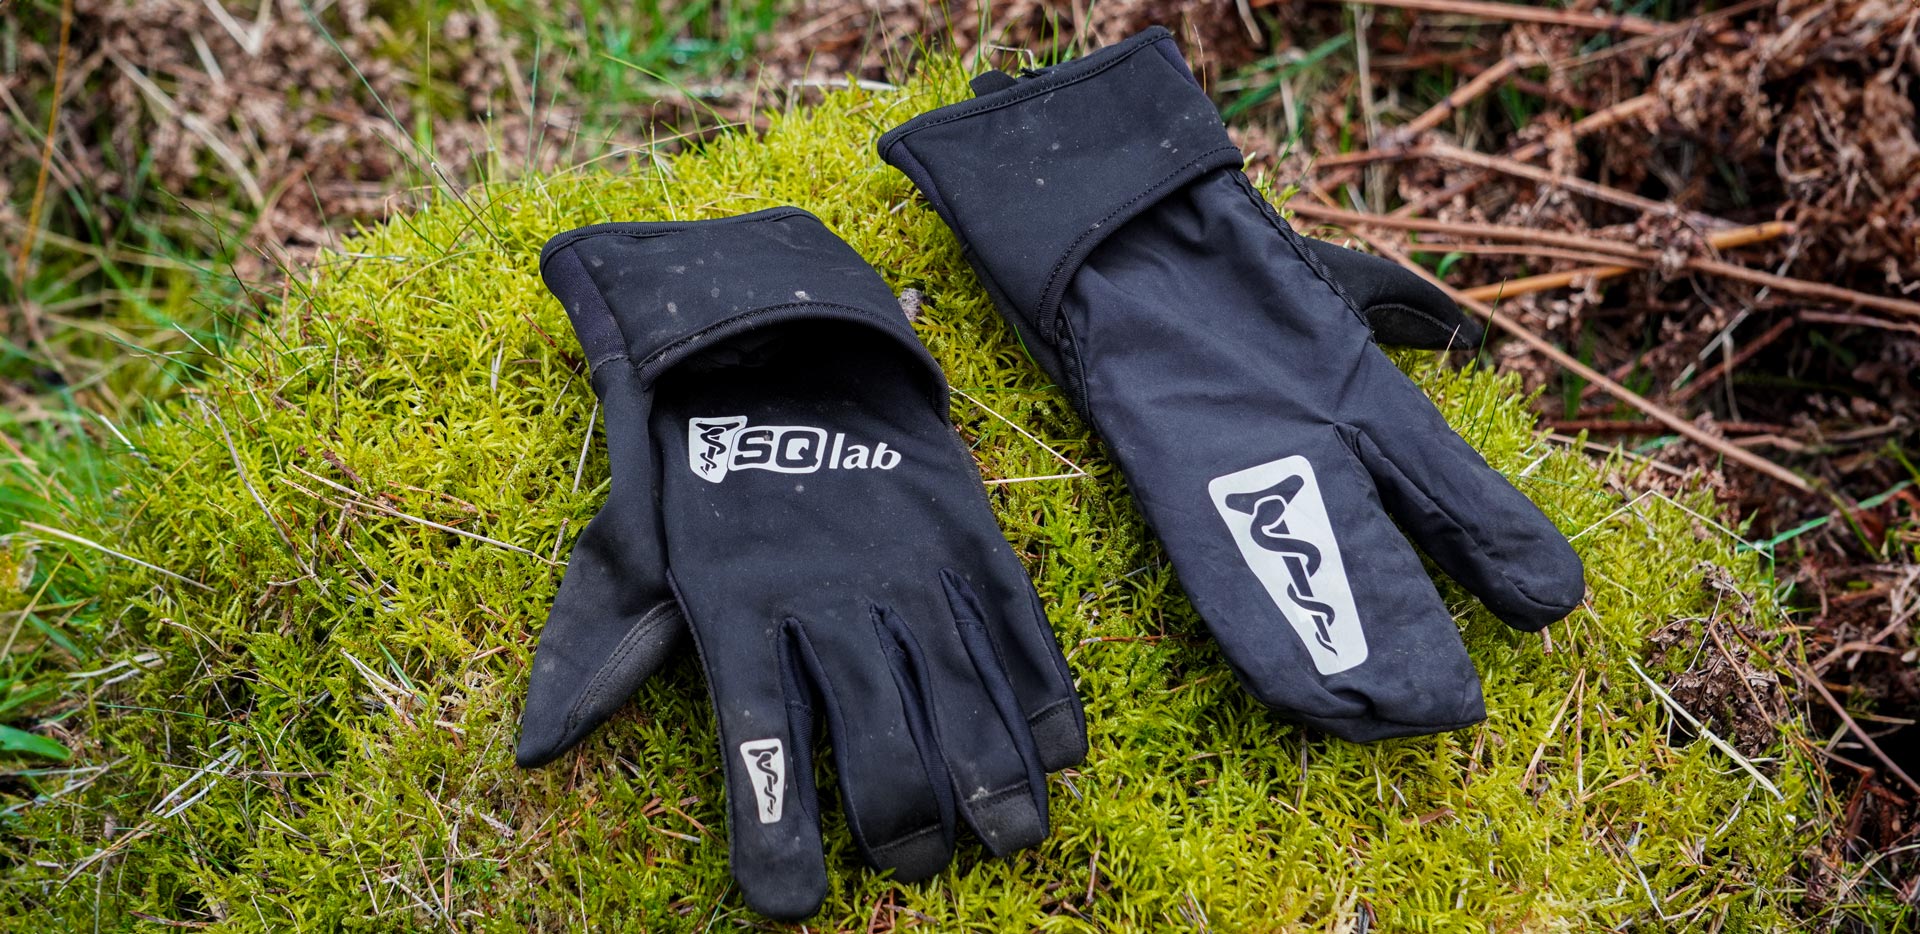 SQ Lab One10 Winter Glove Review